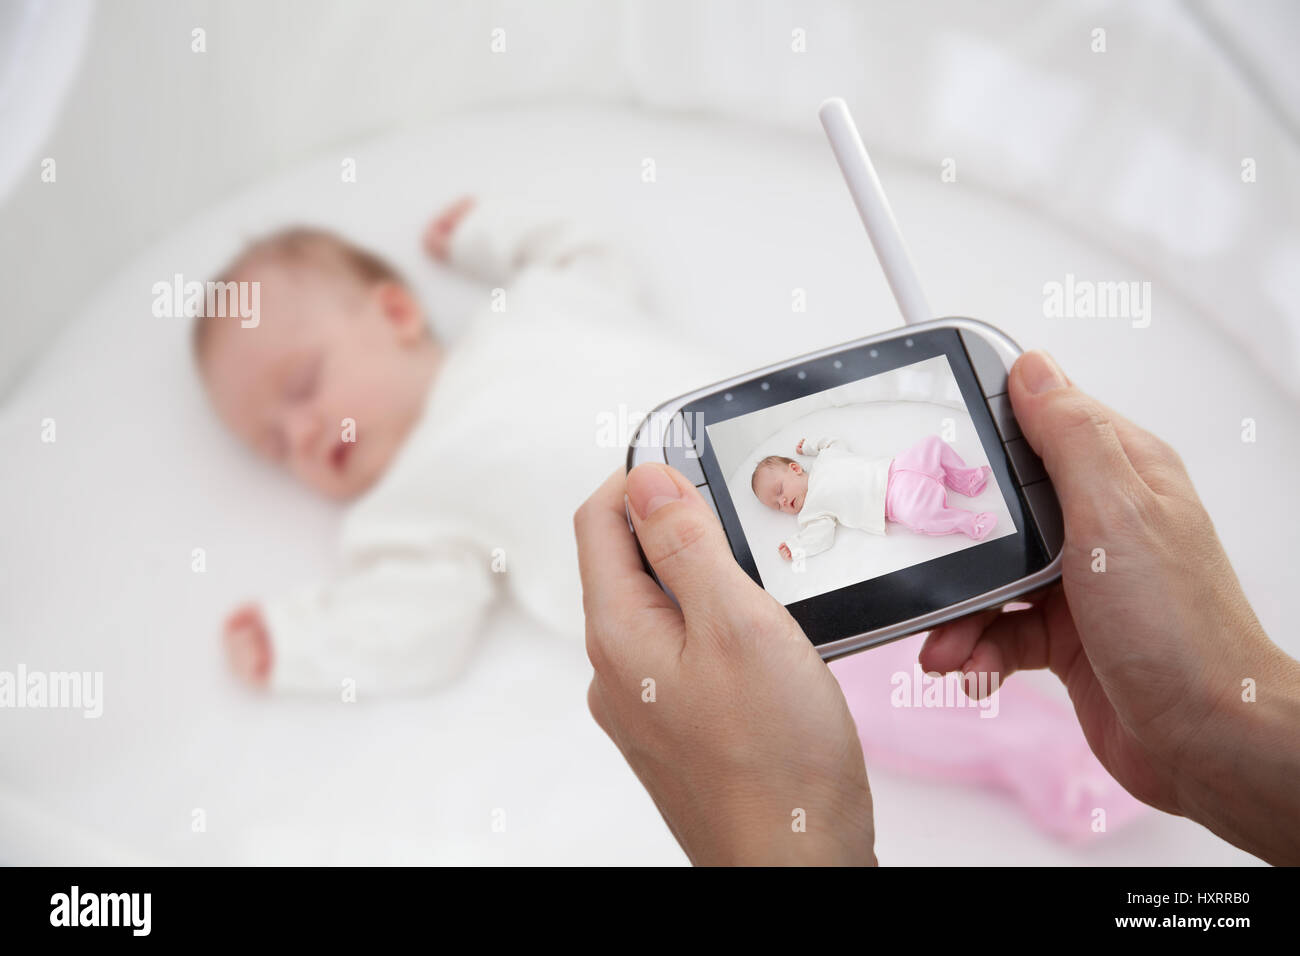 Hand holding video baby monitor for security of the baby Stock Photo